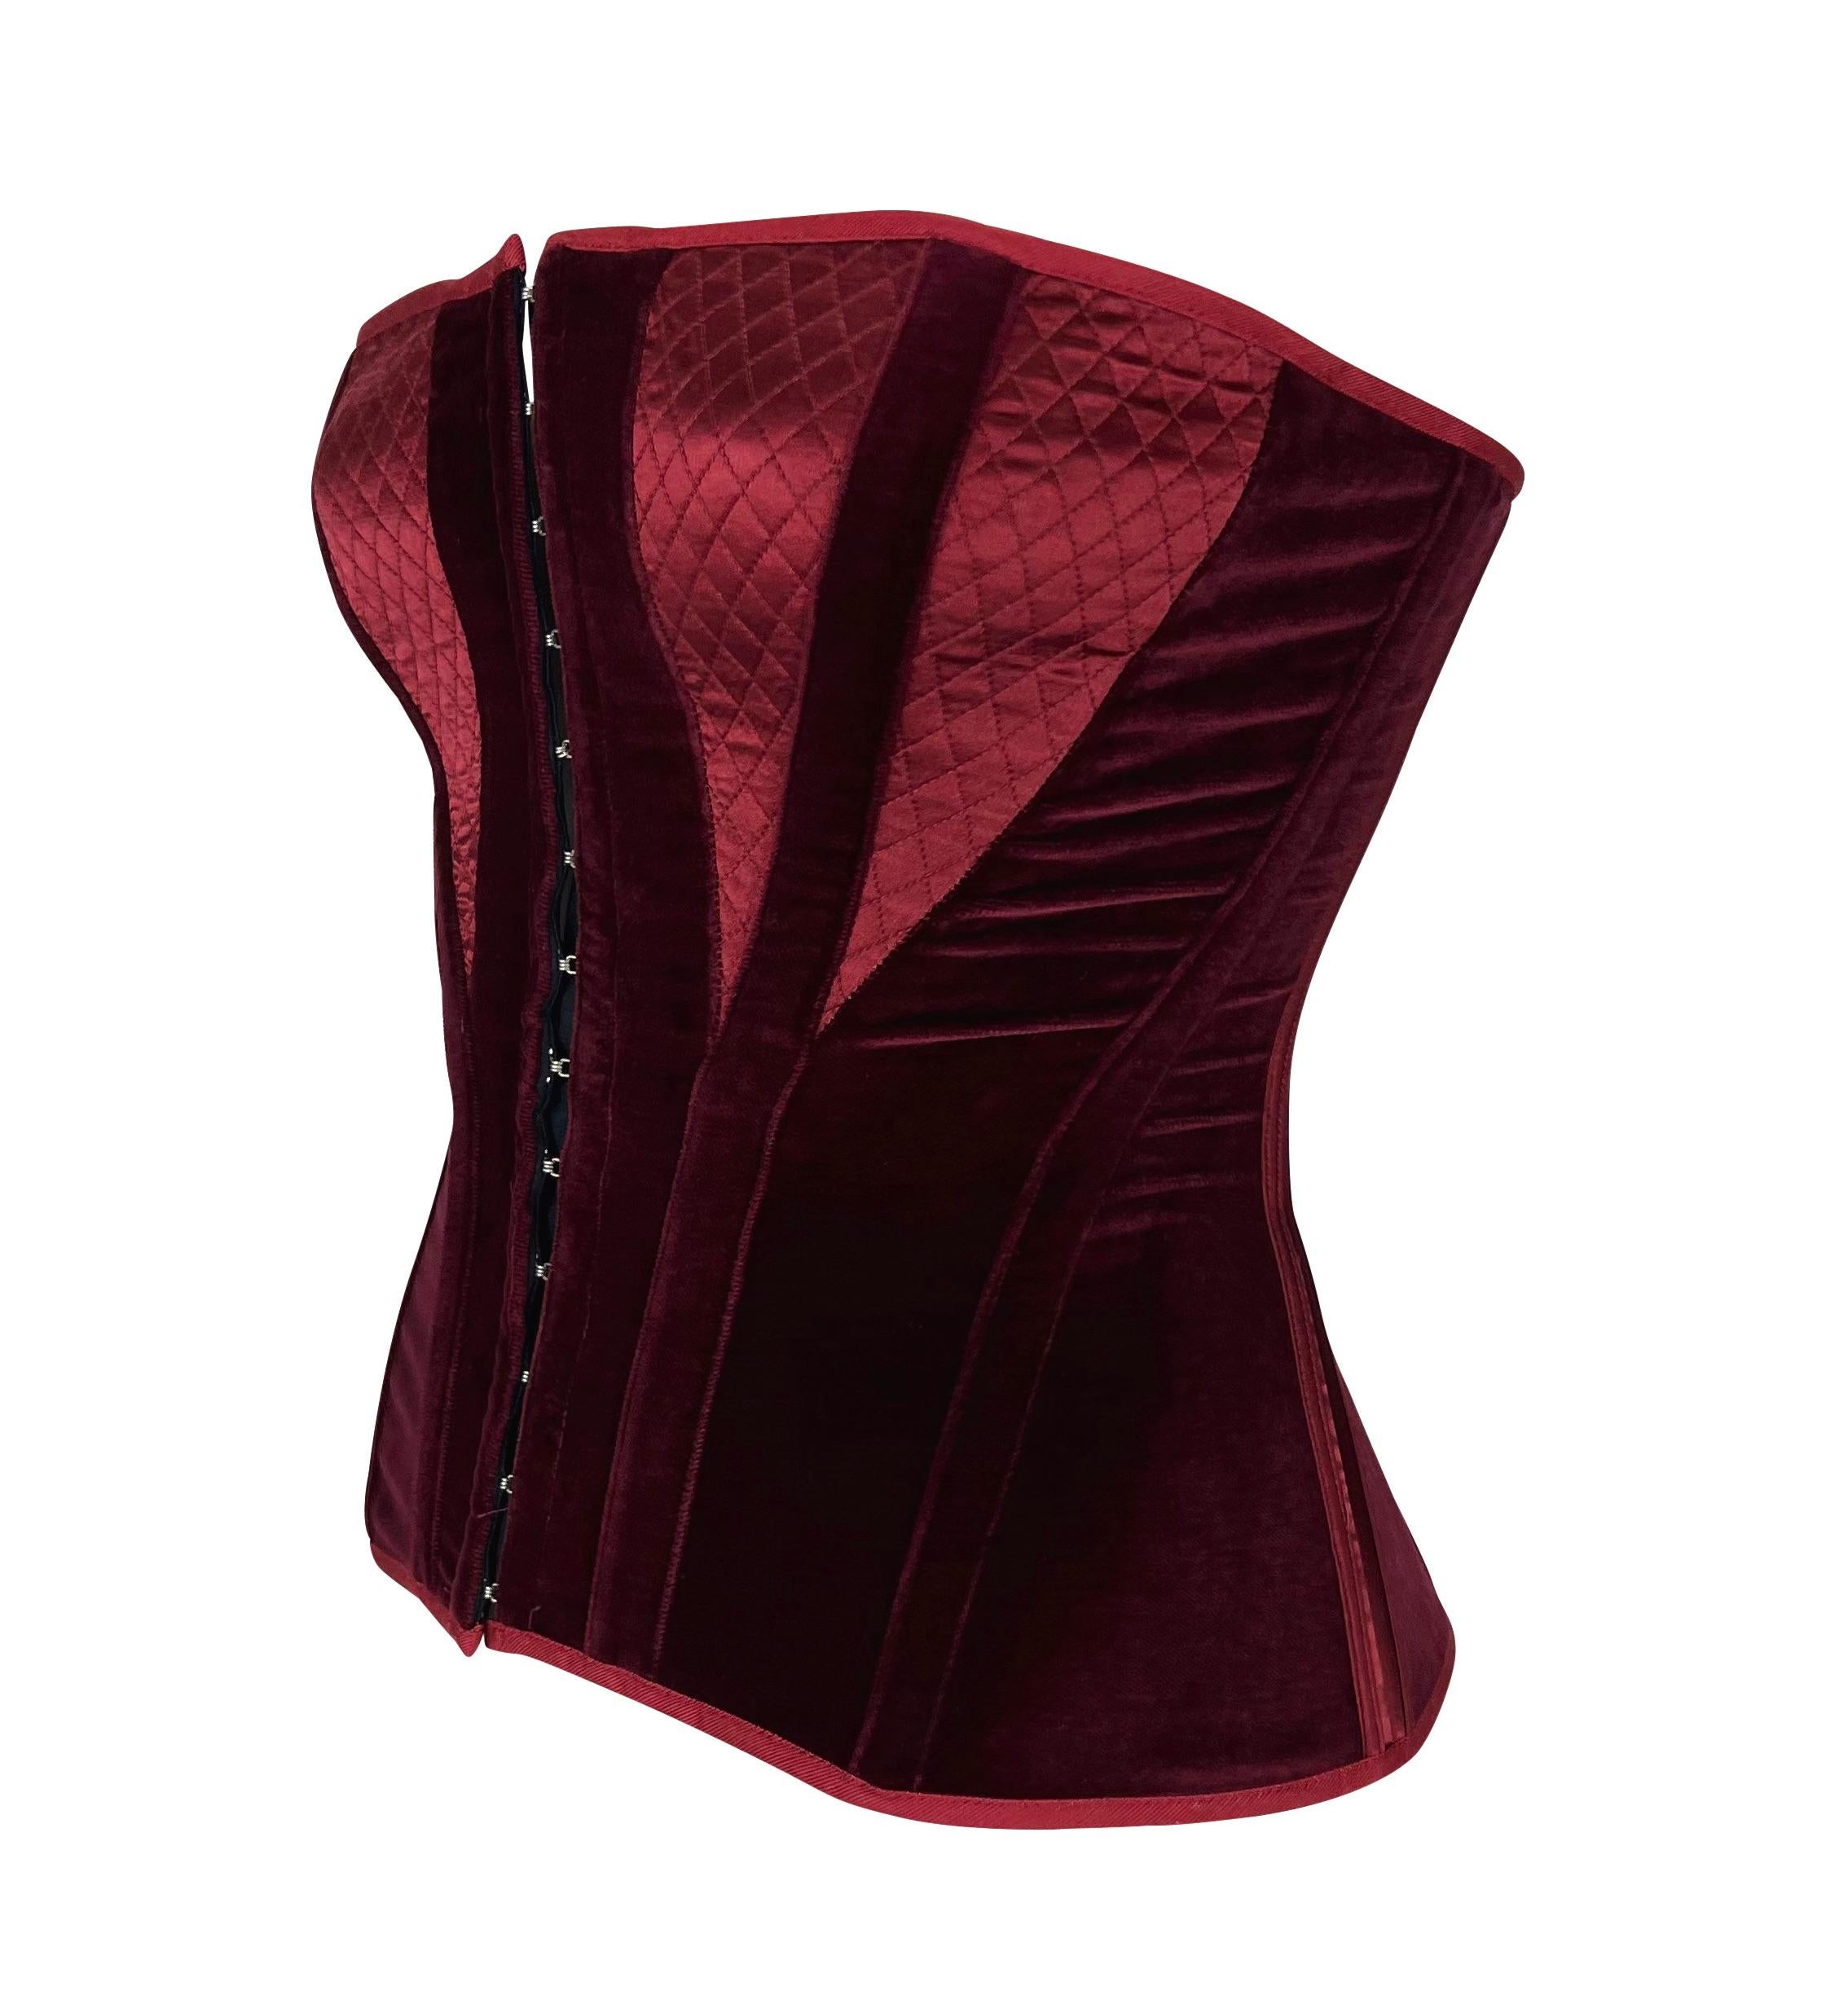 Presenting a gorgeous burgundy velvet Roberto Cavalli corset. From the Fall/Winter 2004 collection, this stunning strapless corset features a silver-tone hook and eye closures at the front, a lace closure at the back, and a boning throughout.